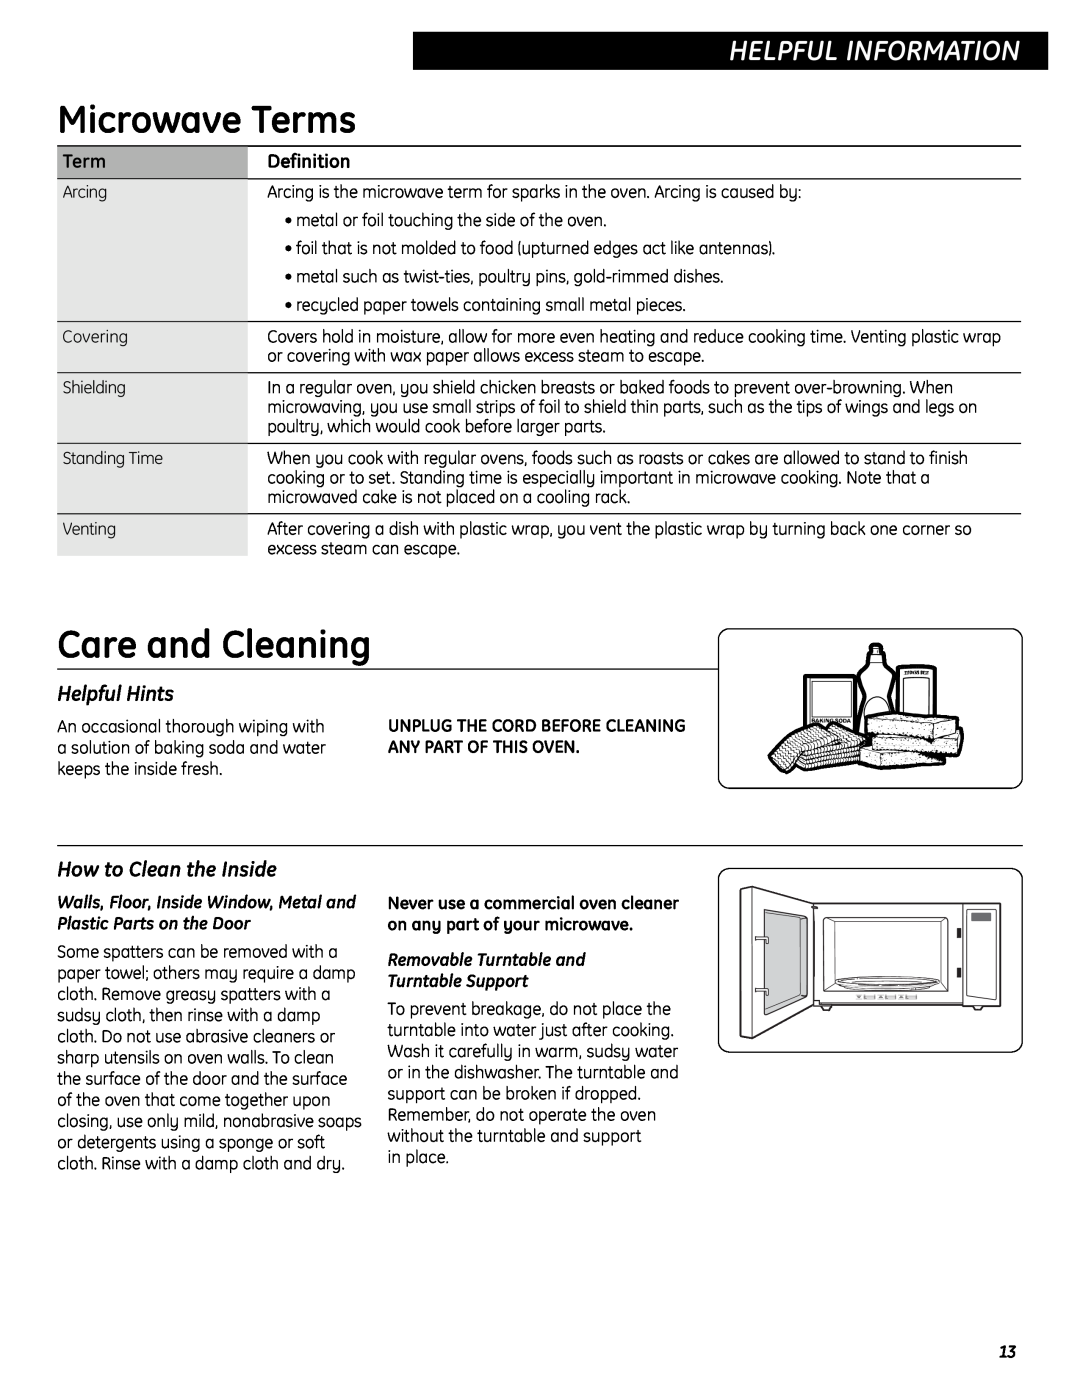 GE SES0732 Microwave Terms, Care and Cleaning, Helpful Information, Helpful Hints, How to Clean the Inside, Definition 